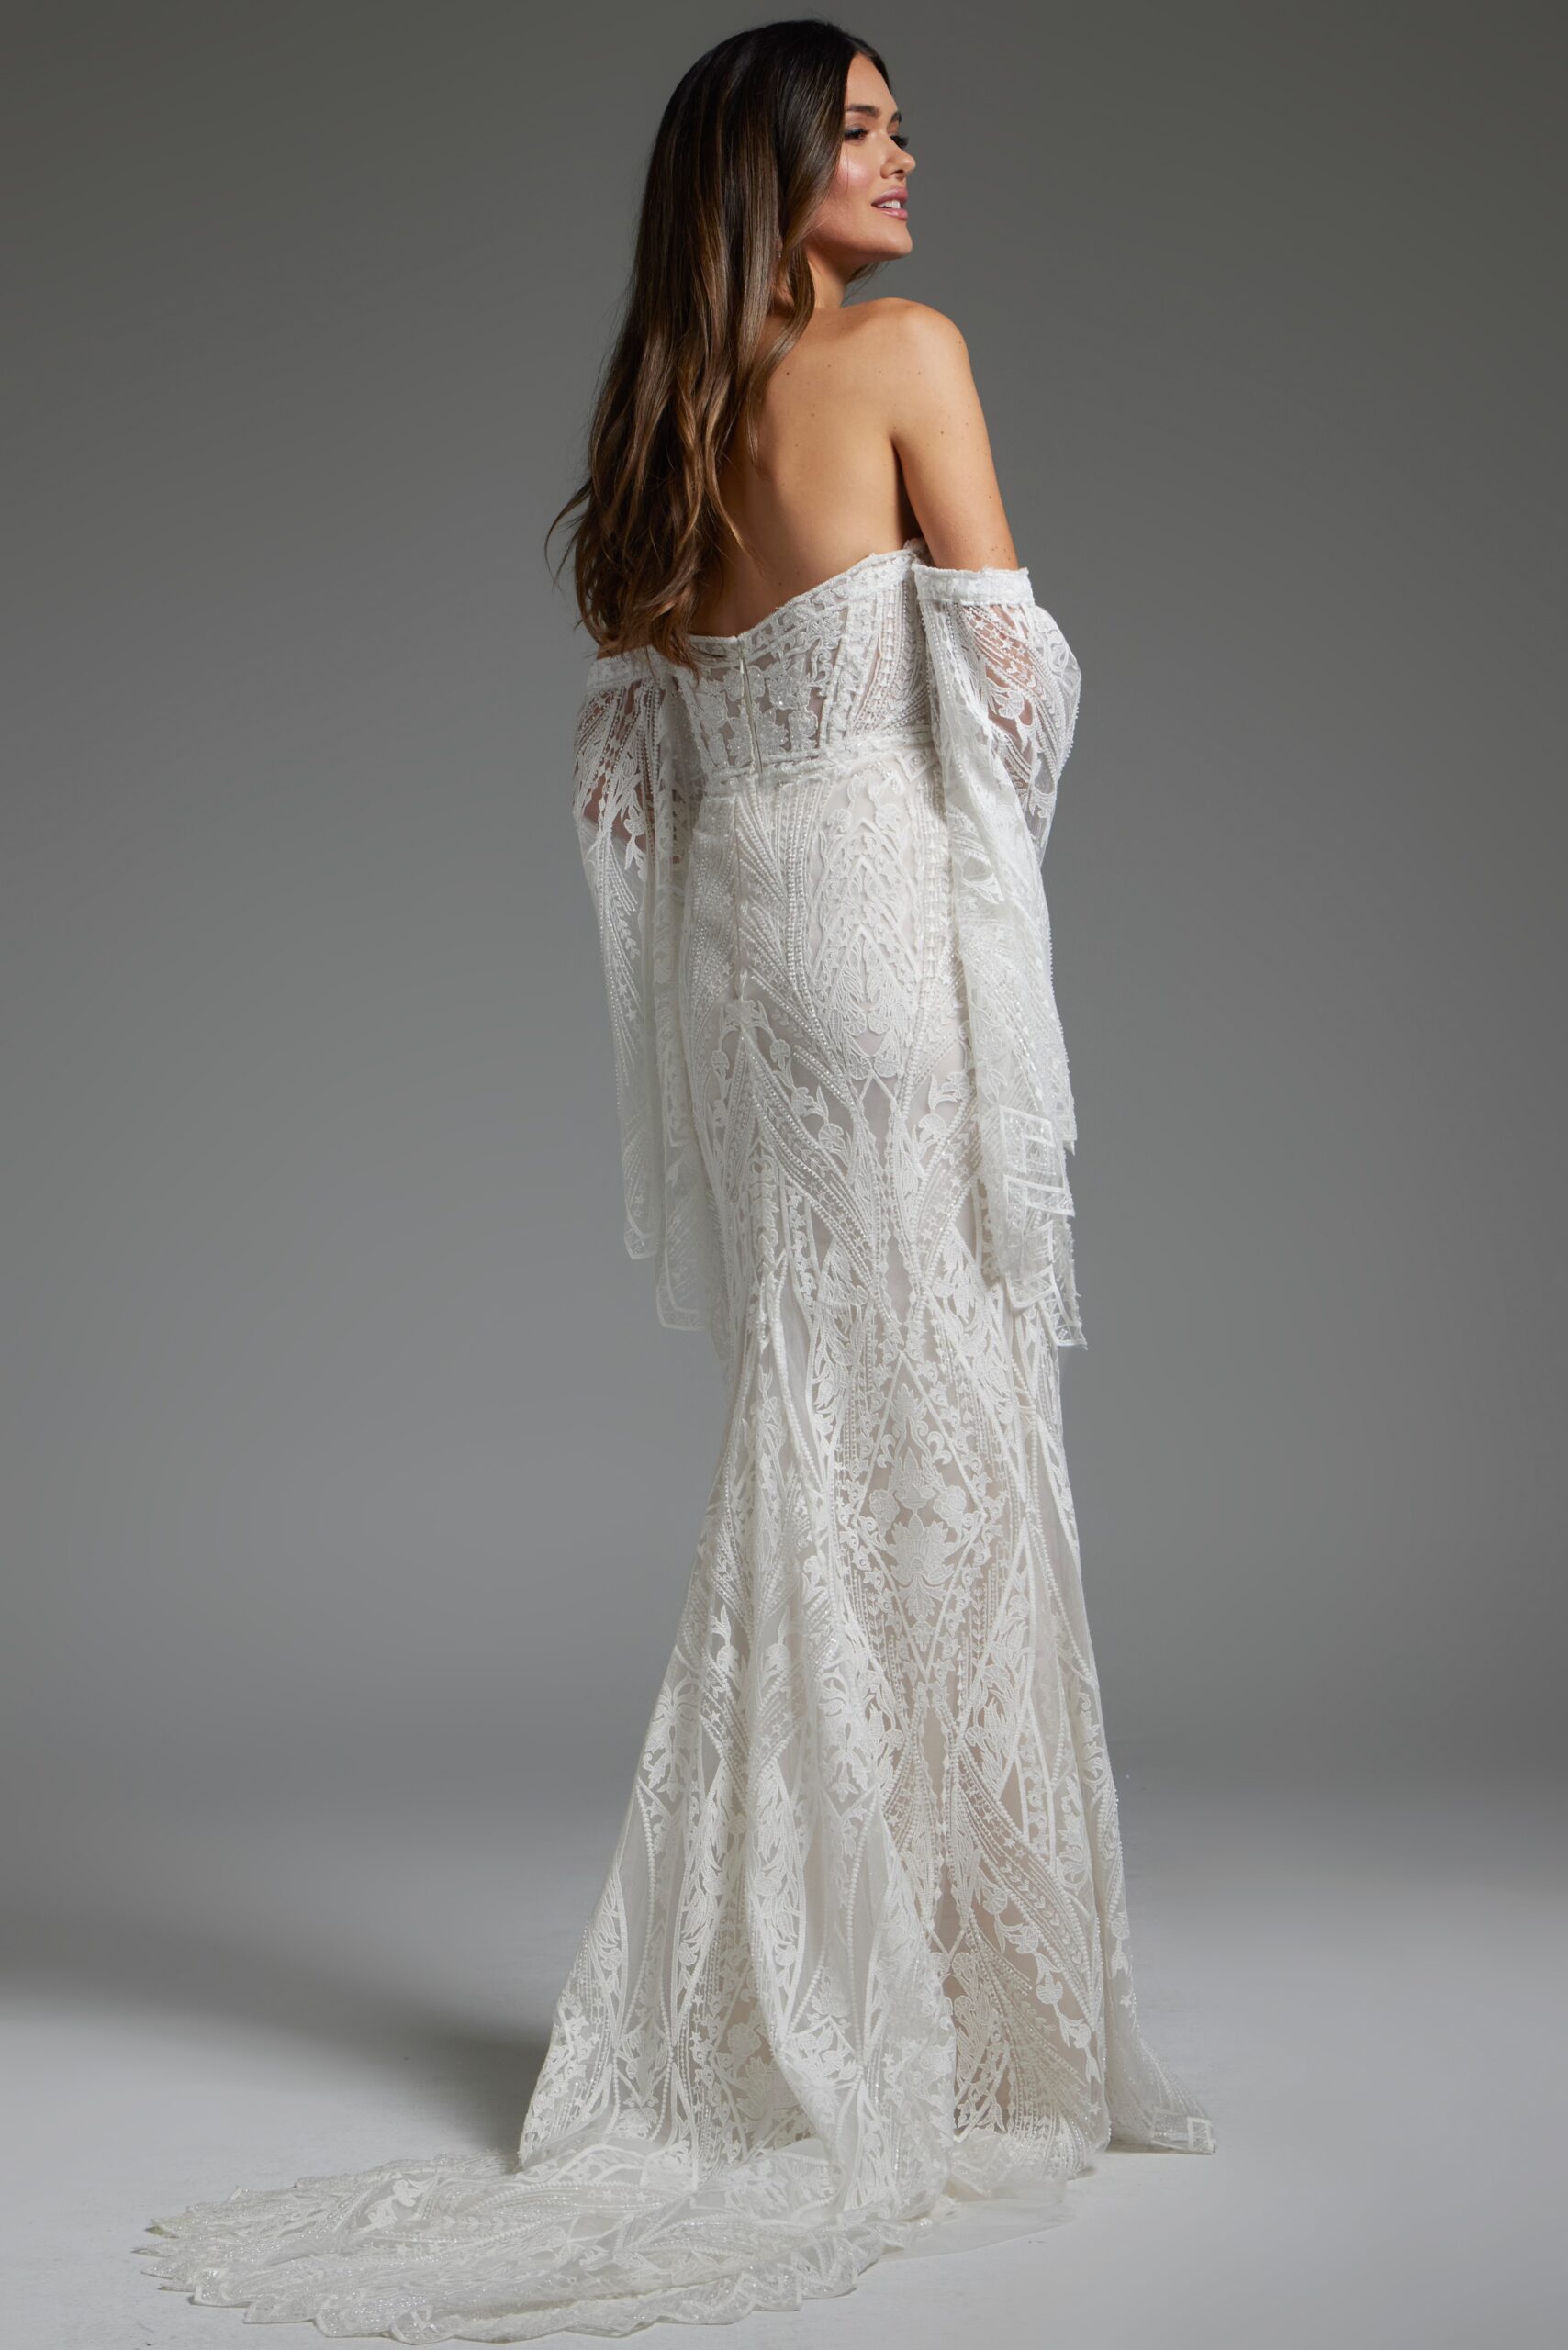 Strapless Lace Wedding Dress with Detached Sleeves